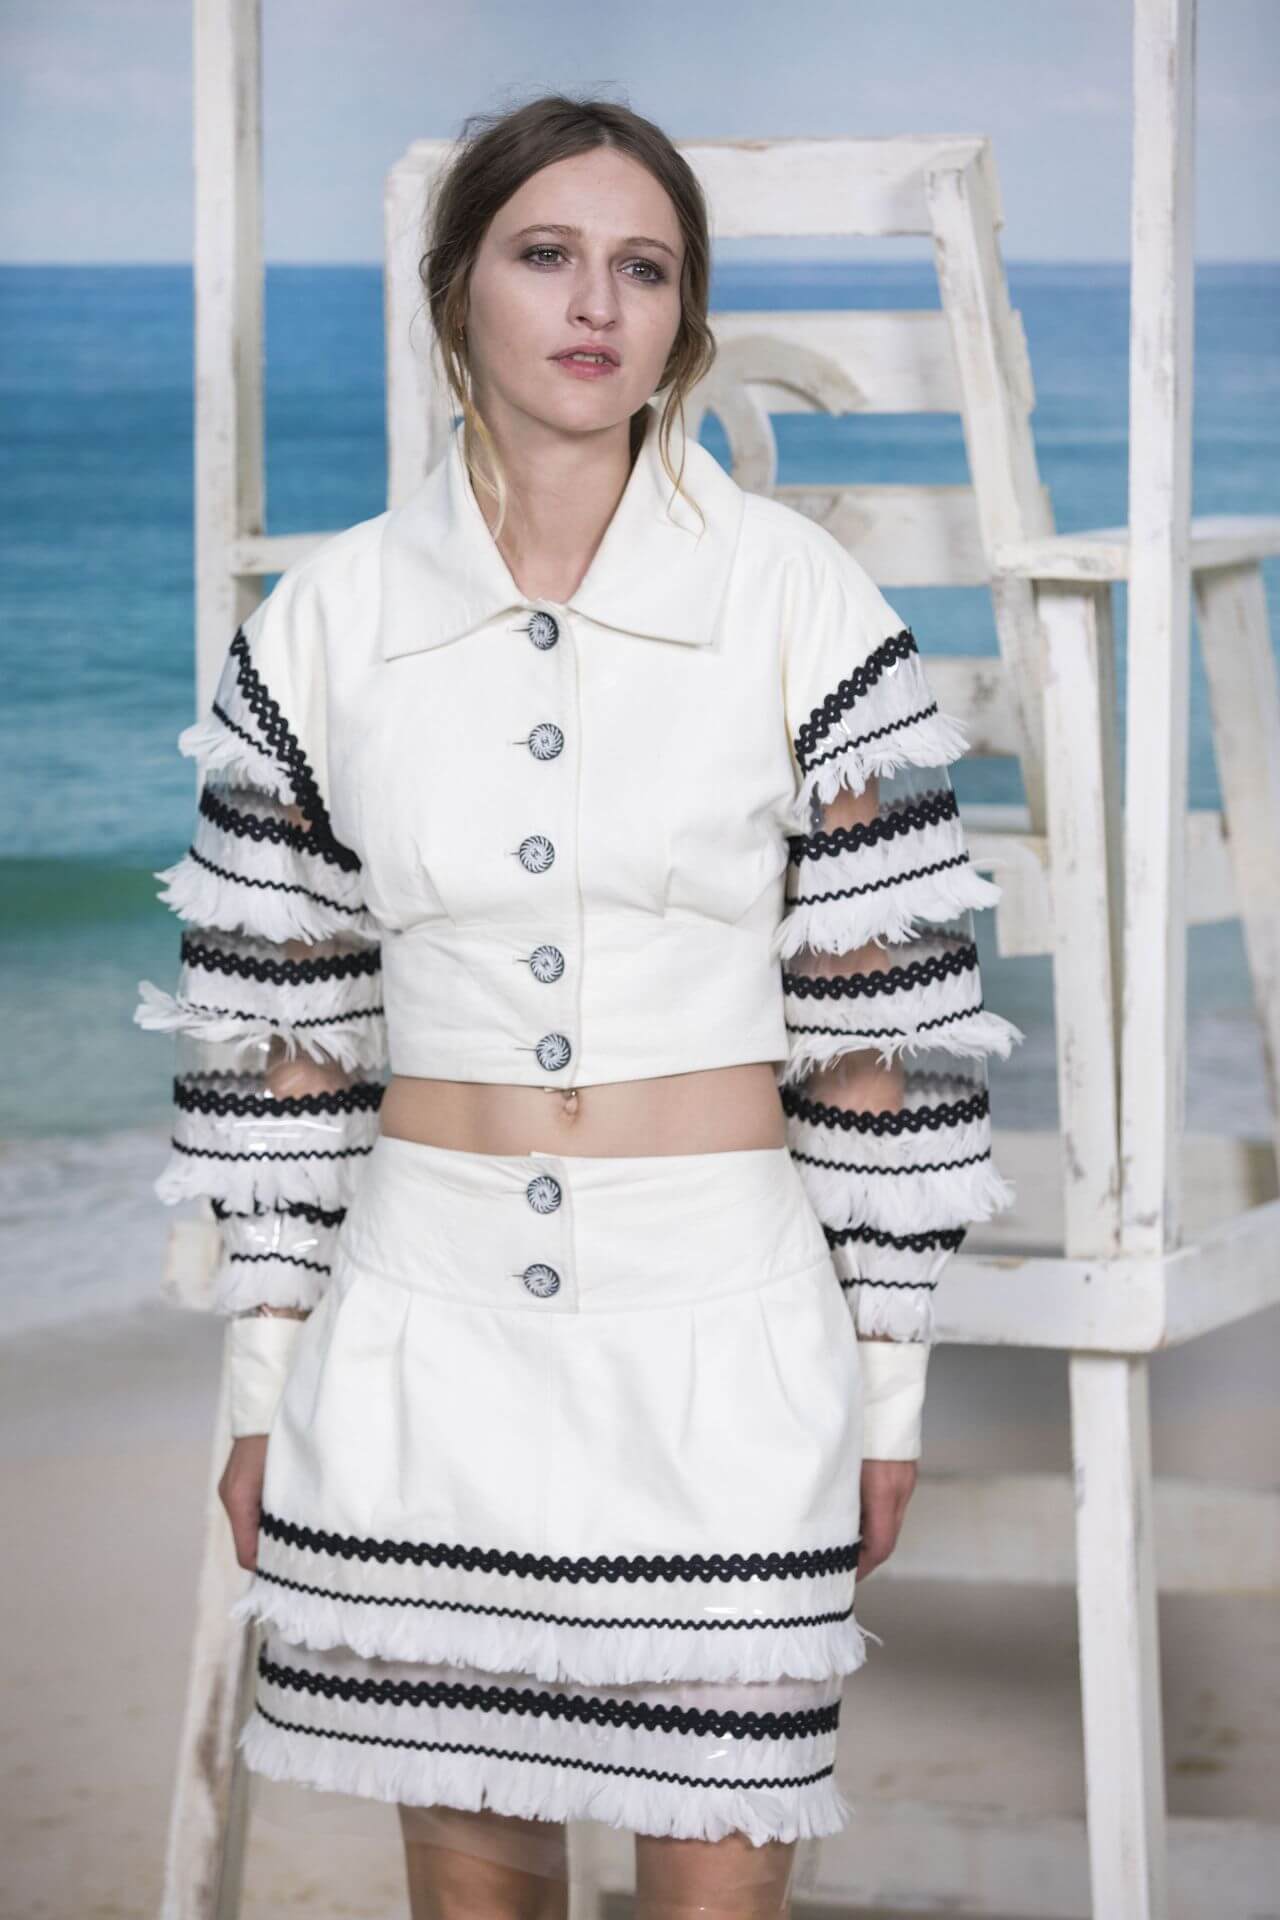 Christa Théret Dons In White Ensemble At Chanel Collection Show at Paris Fashion